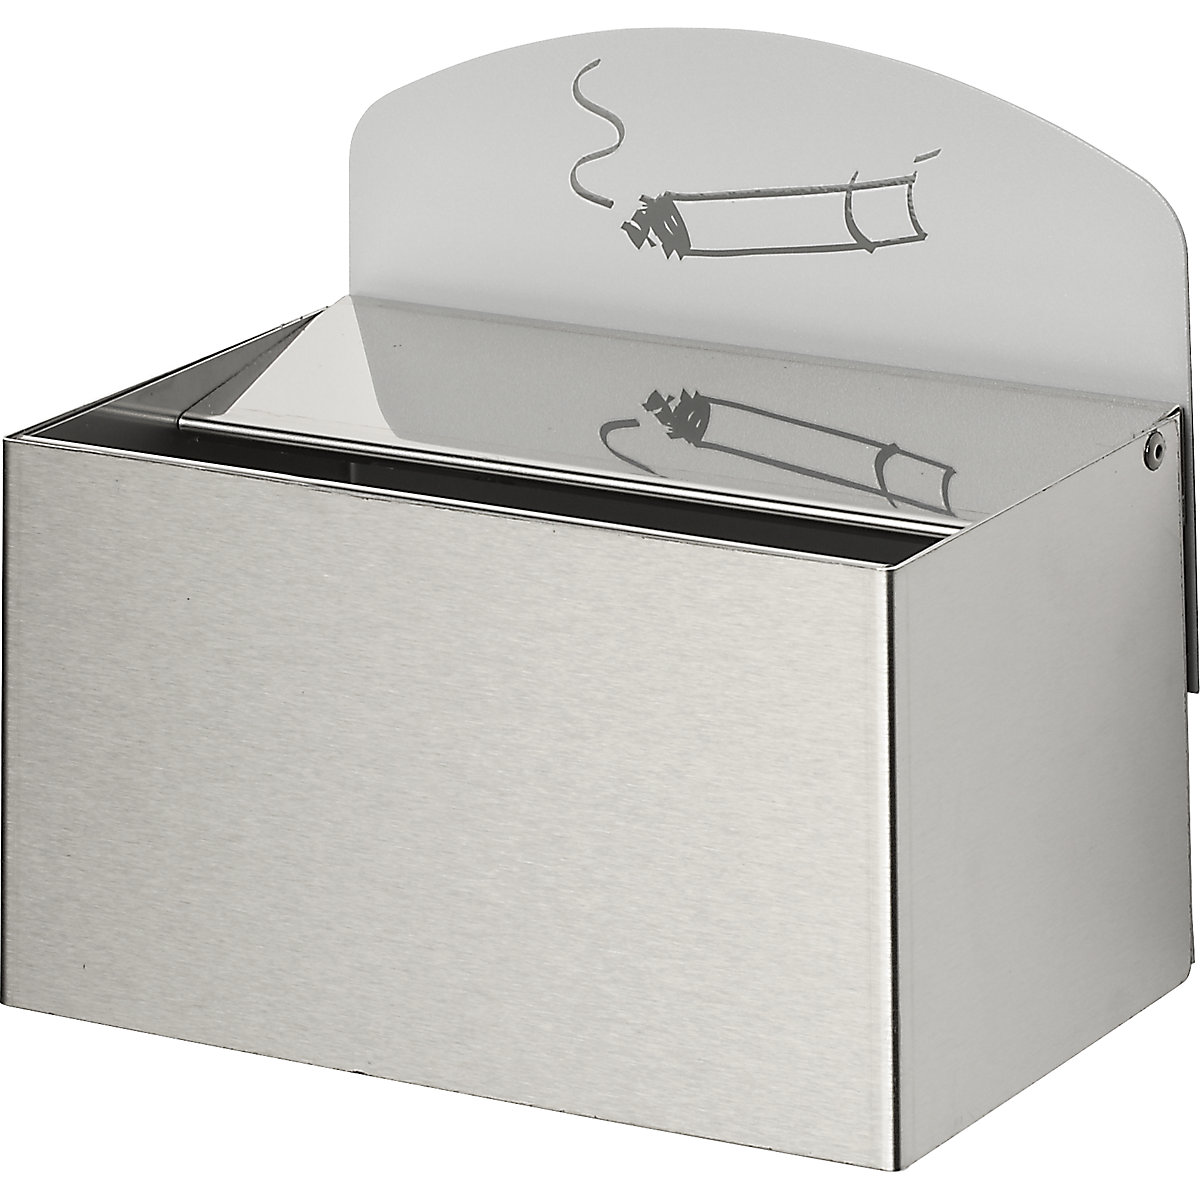 VAR – Wall ashtray with sign, HxWxD 125 x 200 x 125 mm, stainless steel